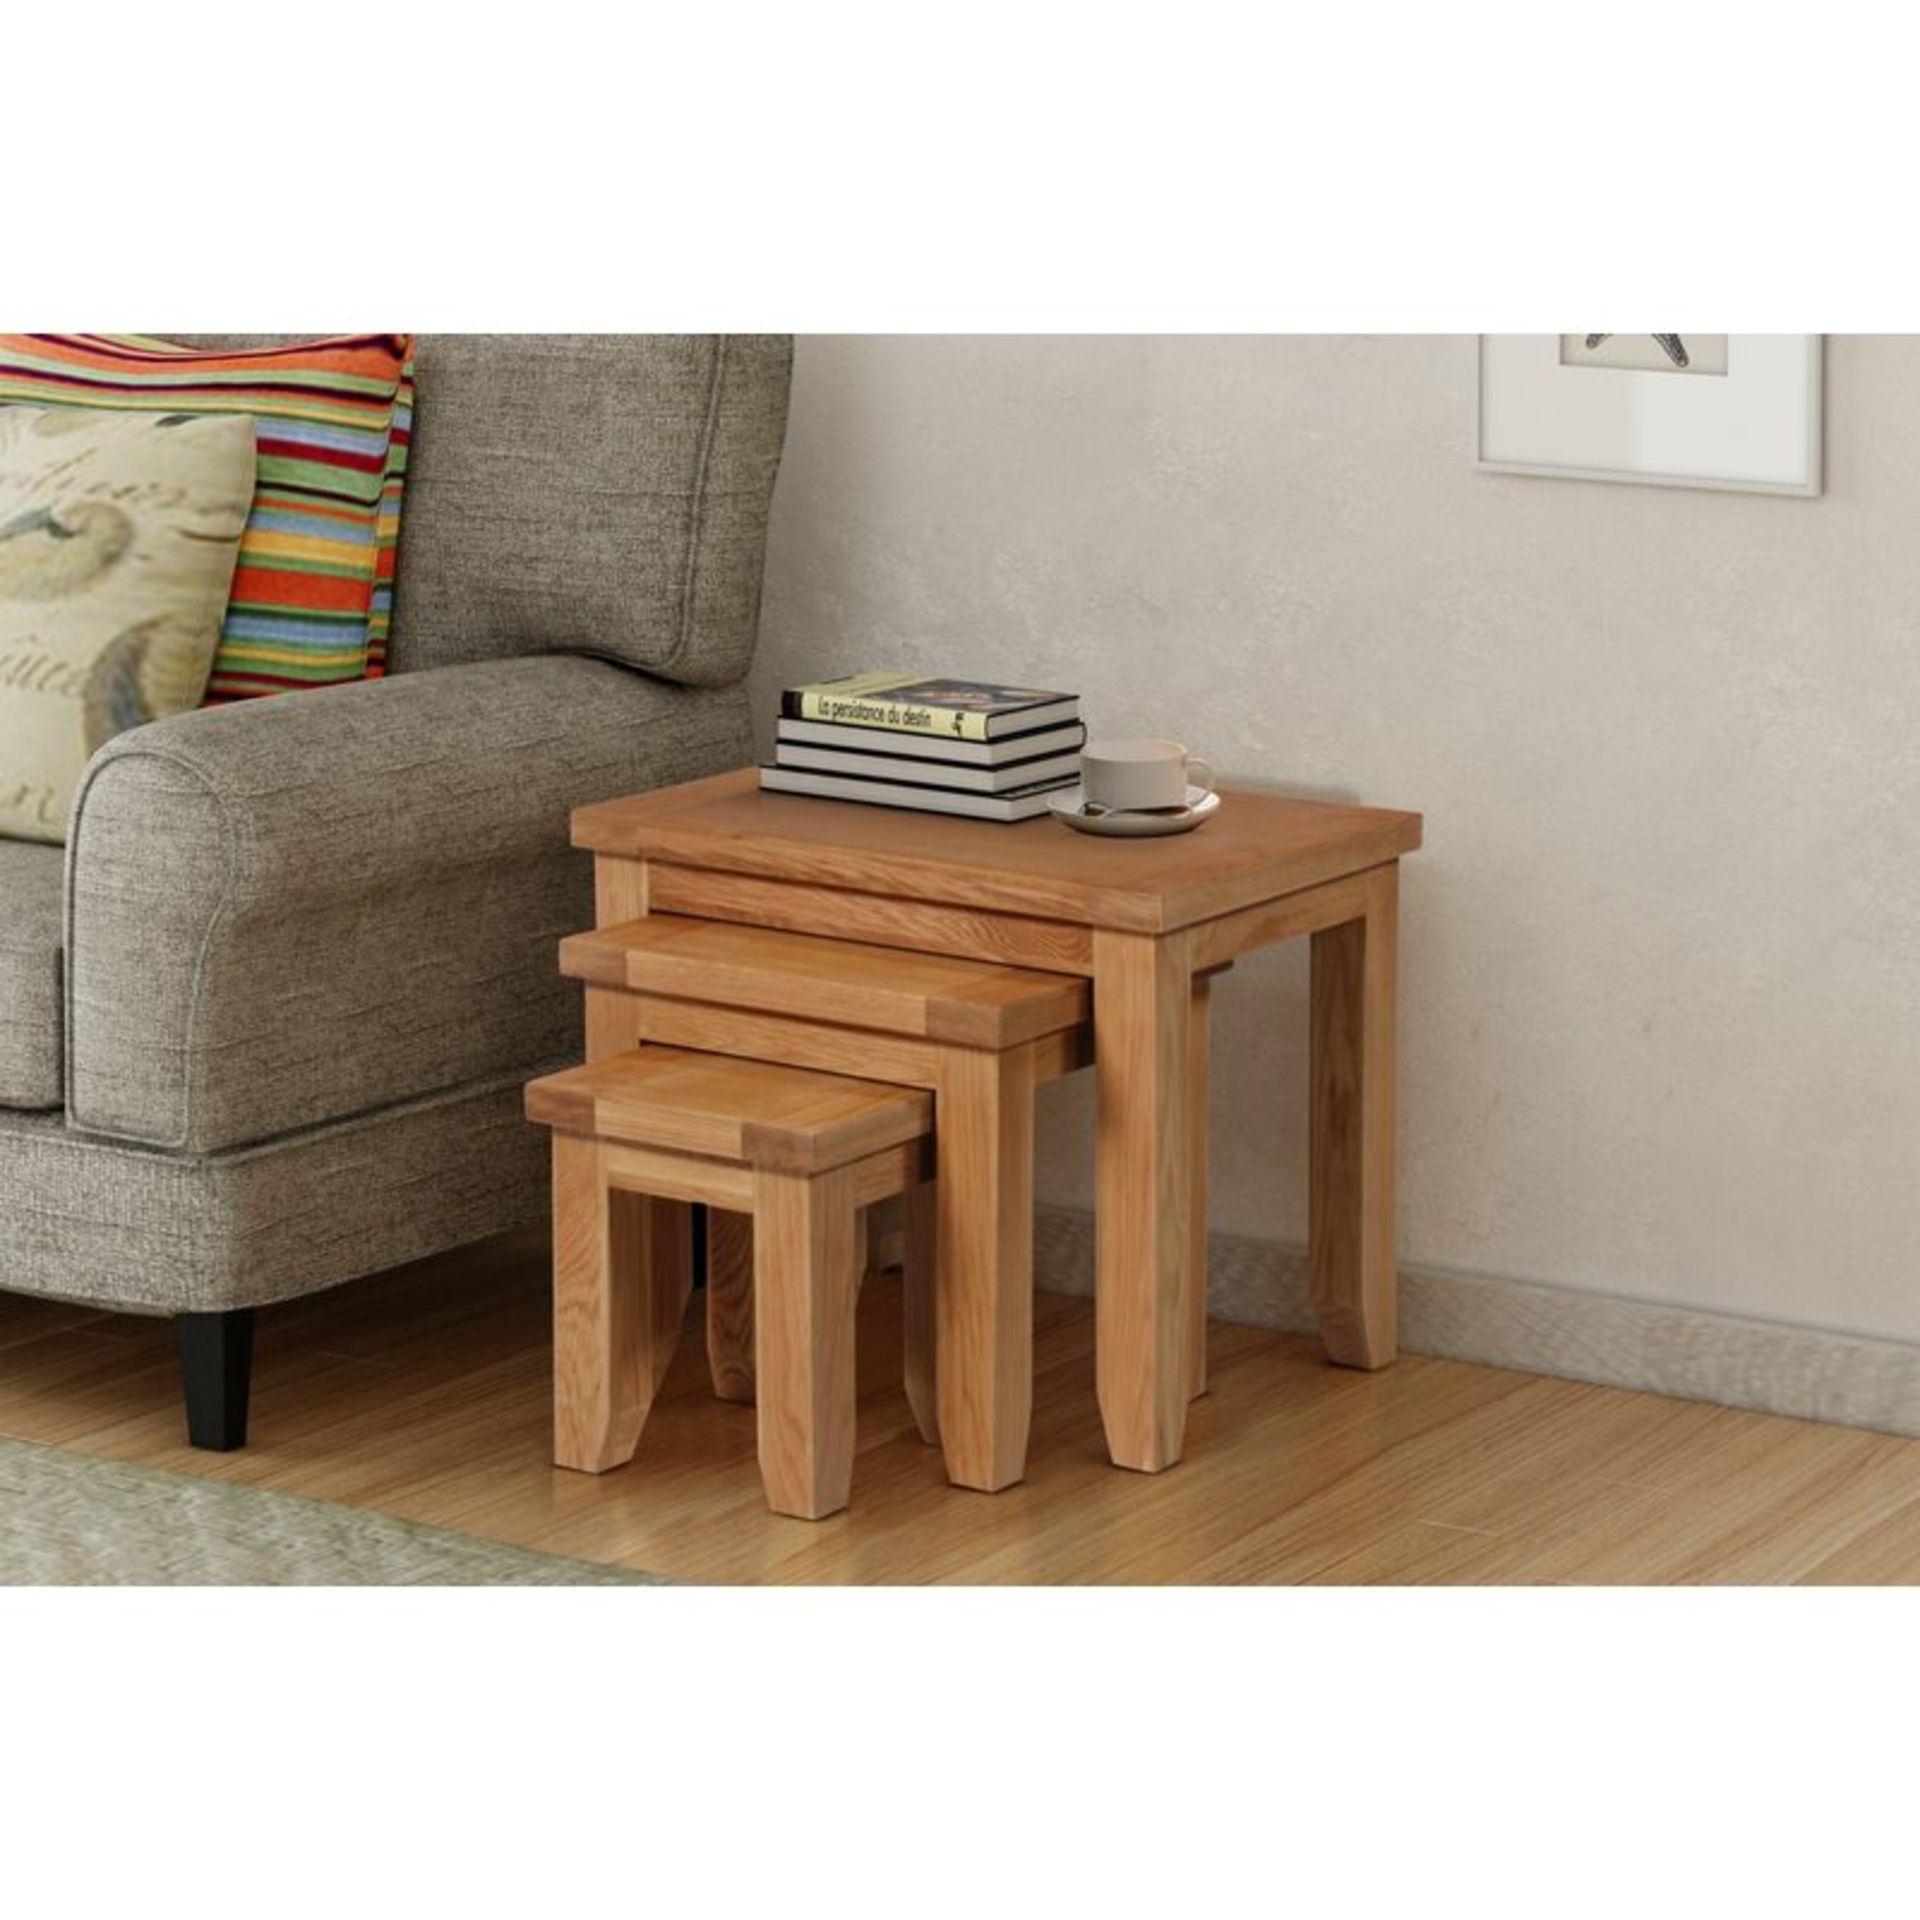 August Grove Vineland 3 Piece Nest of Tables RRP £219.99 (WAY1)